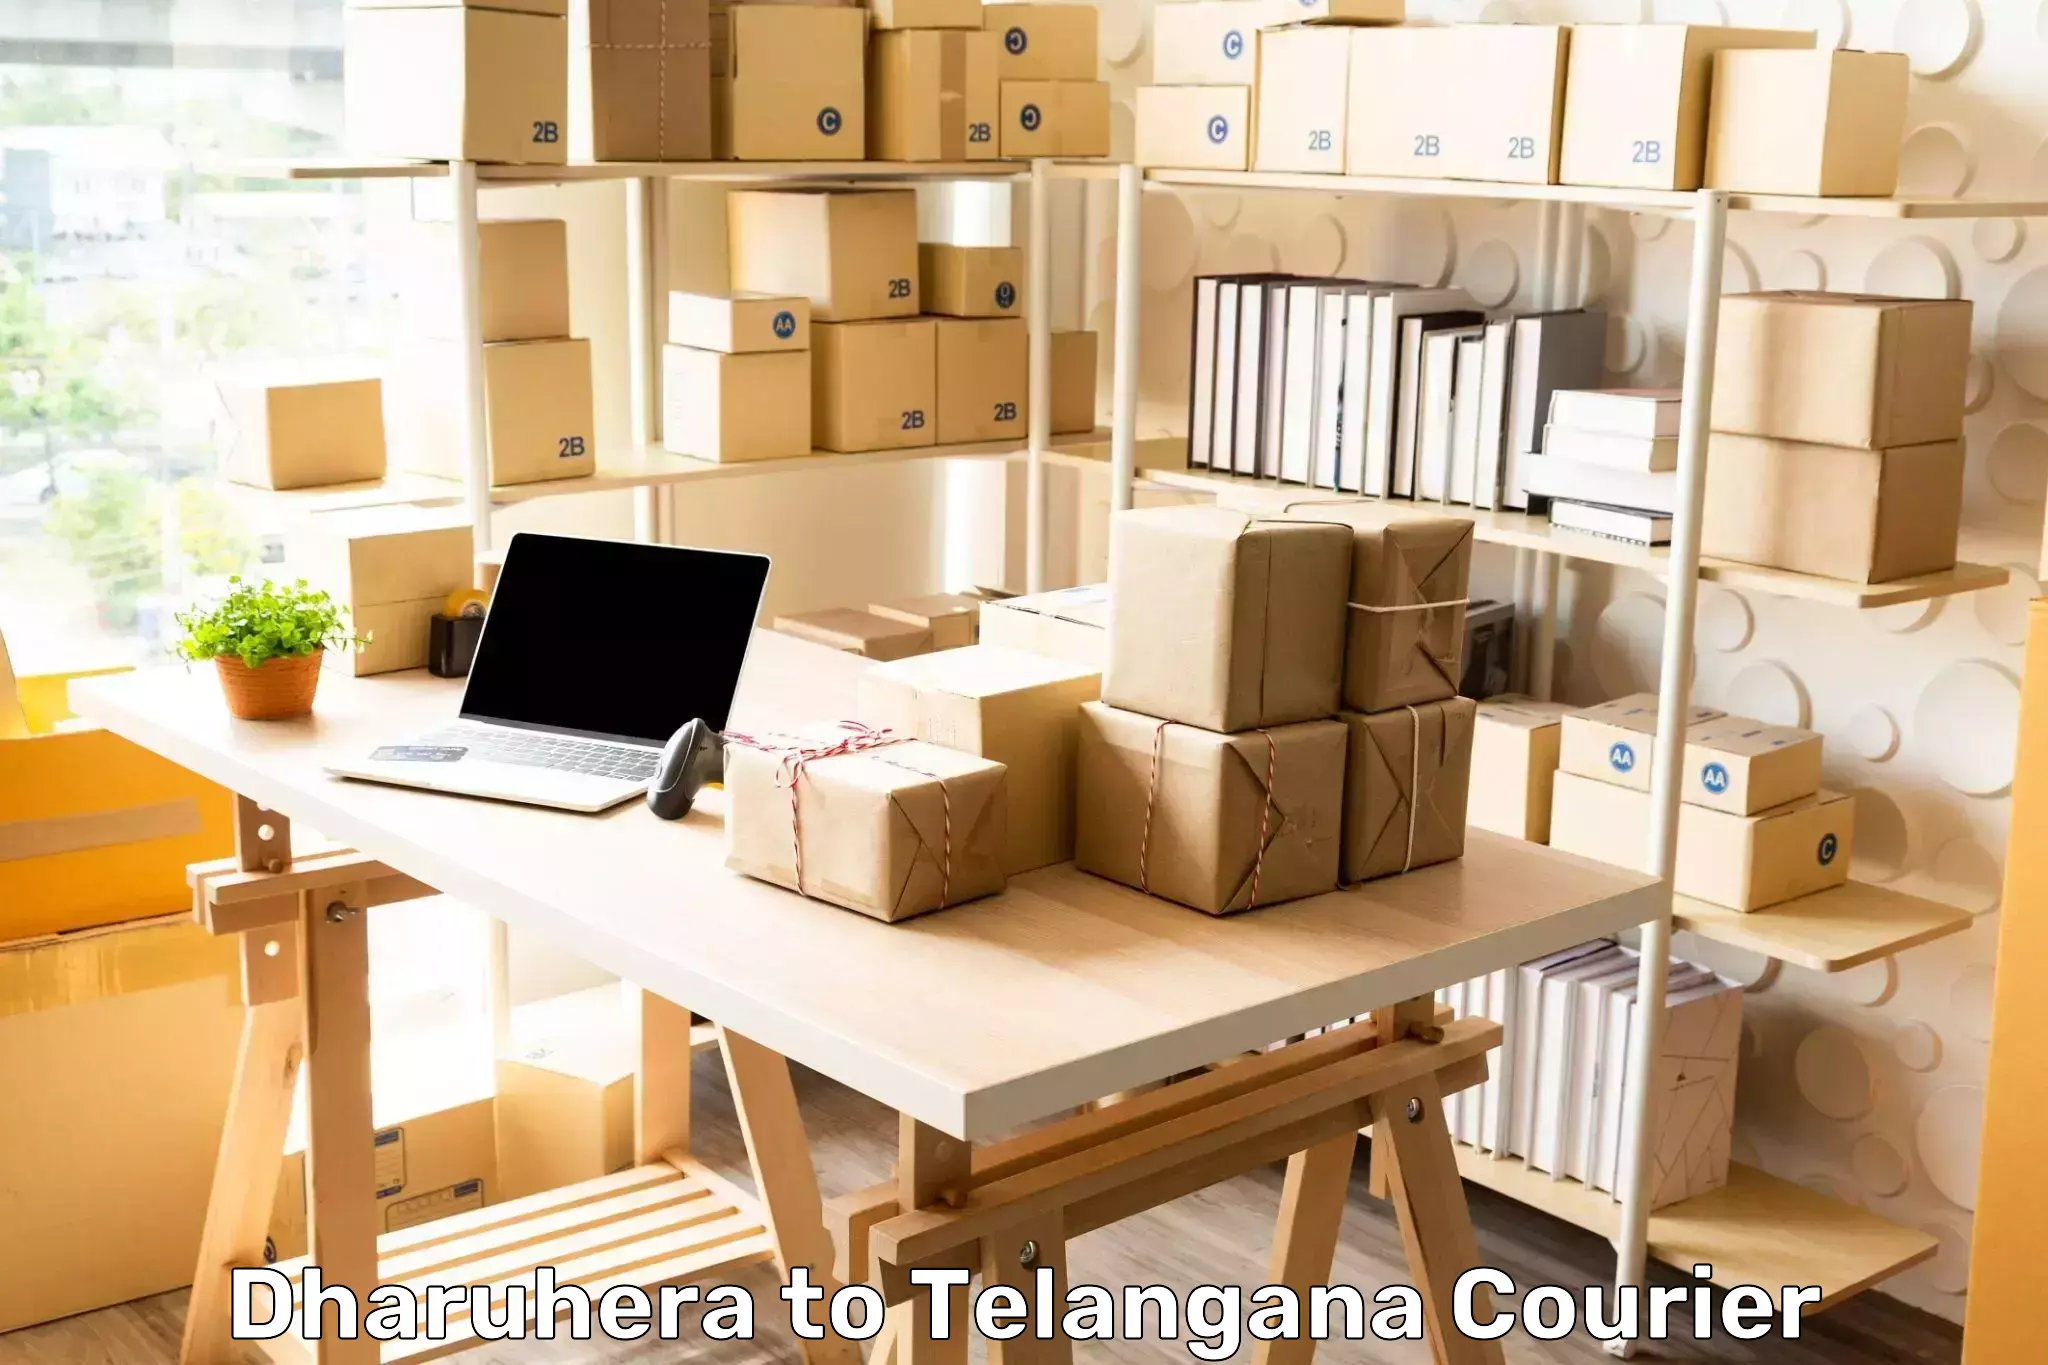 Optimized delivery routes in Dharuhera to Bhadrachalam